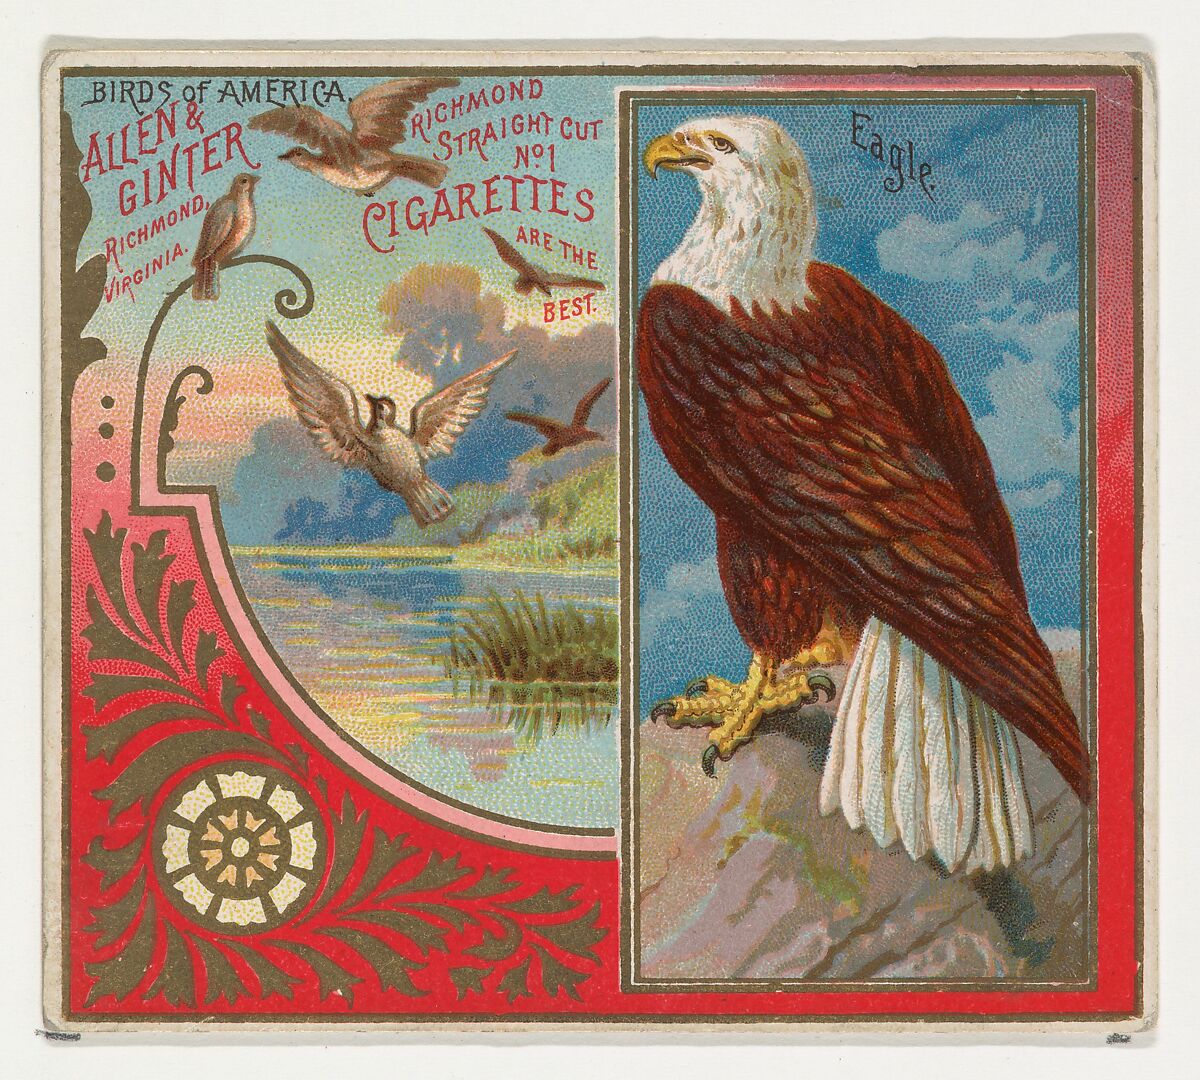 Eagle, from the Birds of America series (N37) for Allen & Ginter Cigarettes, Issued by Allen &amp; Ginter (American, Richmond, Virginia), Commercial color lithograph 